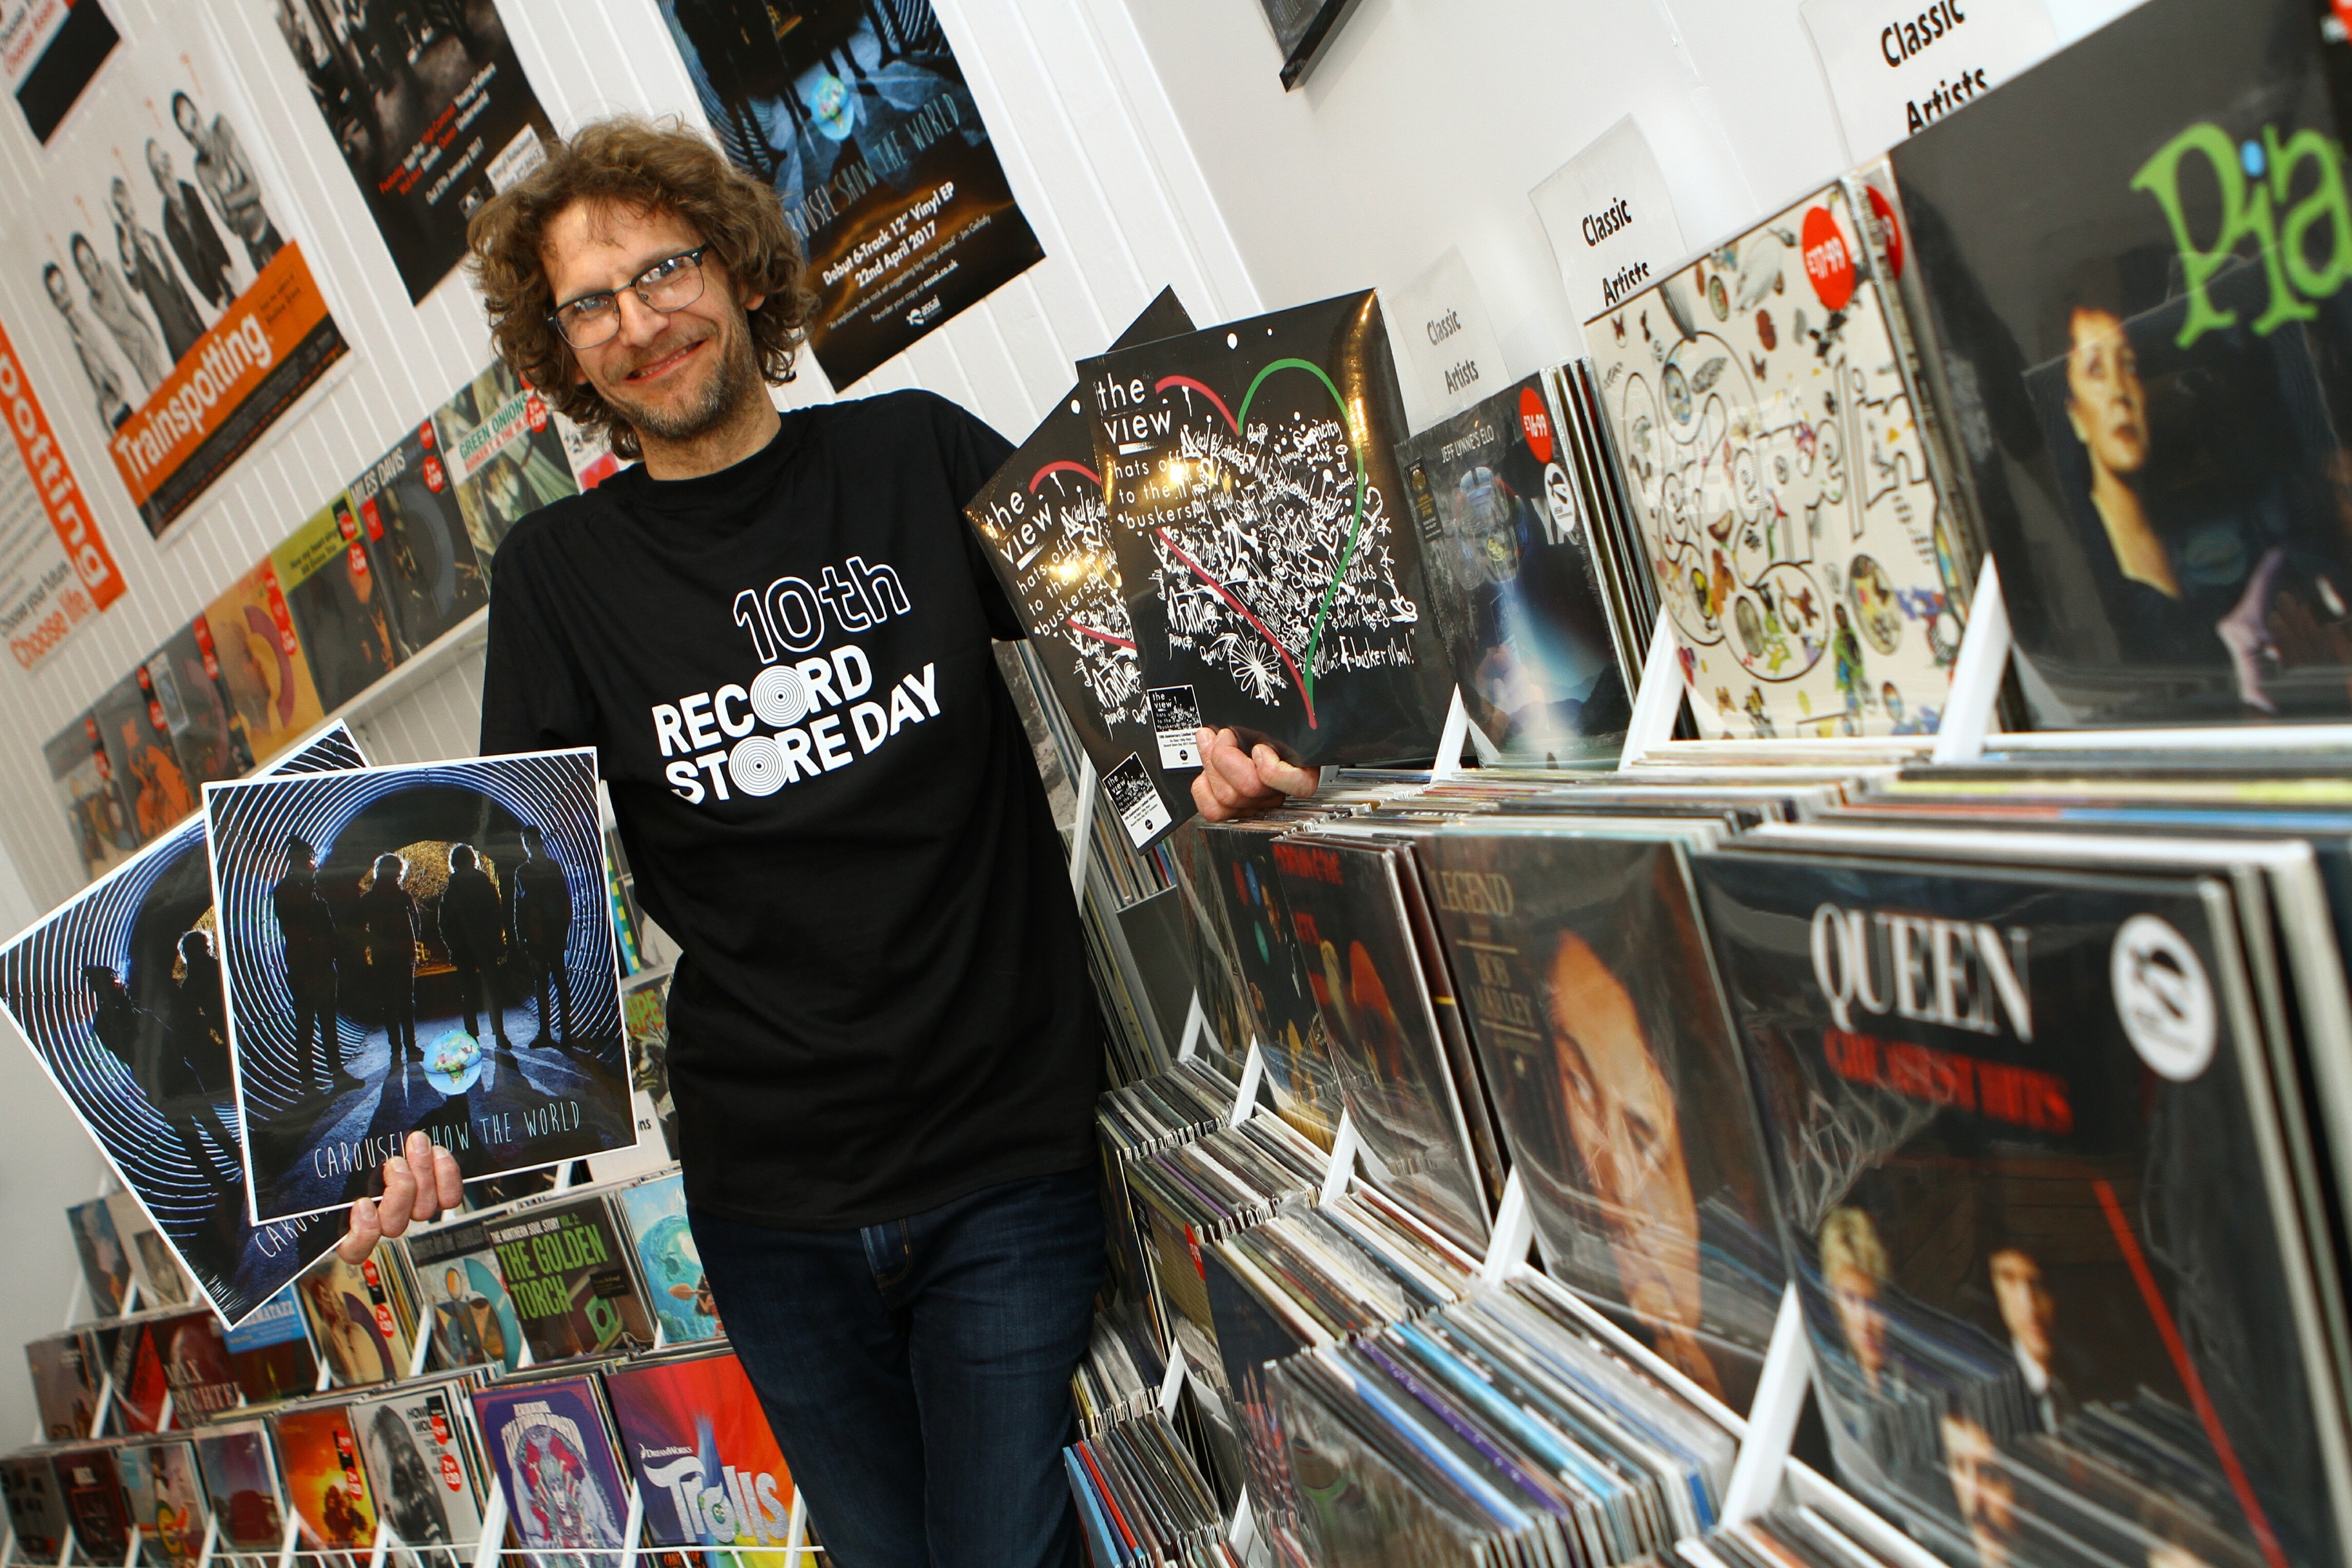 Andy McLaren - Manager of Assai Records in Broughty Ferry, holding copies of two exclusives, on the left, Carousel - Show The World, the first recording on the  Assai label, and The View - Hats Off To The Buskers.